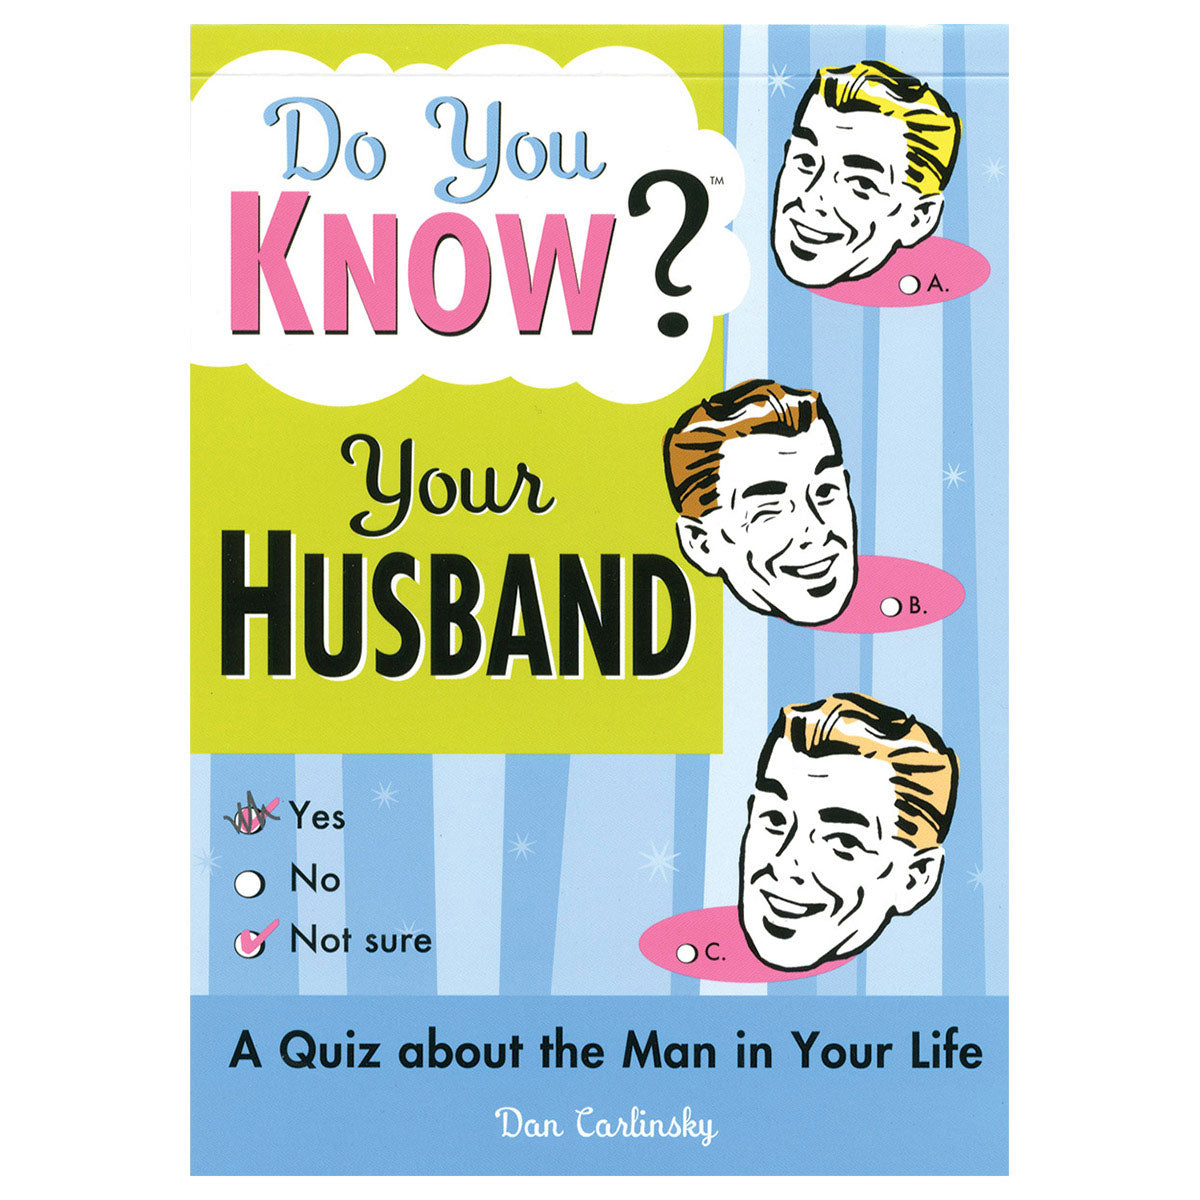 Do You Know Your HUSBAND? - A Quiz About the Man in Your Life - Sourcebooks Casablanca